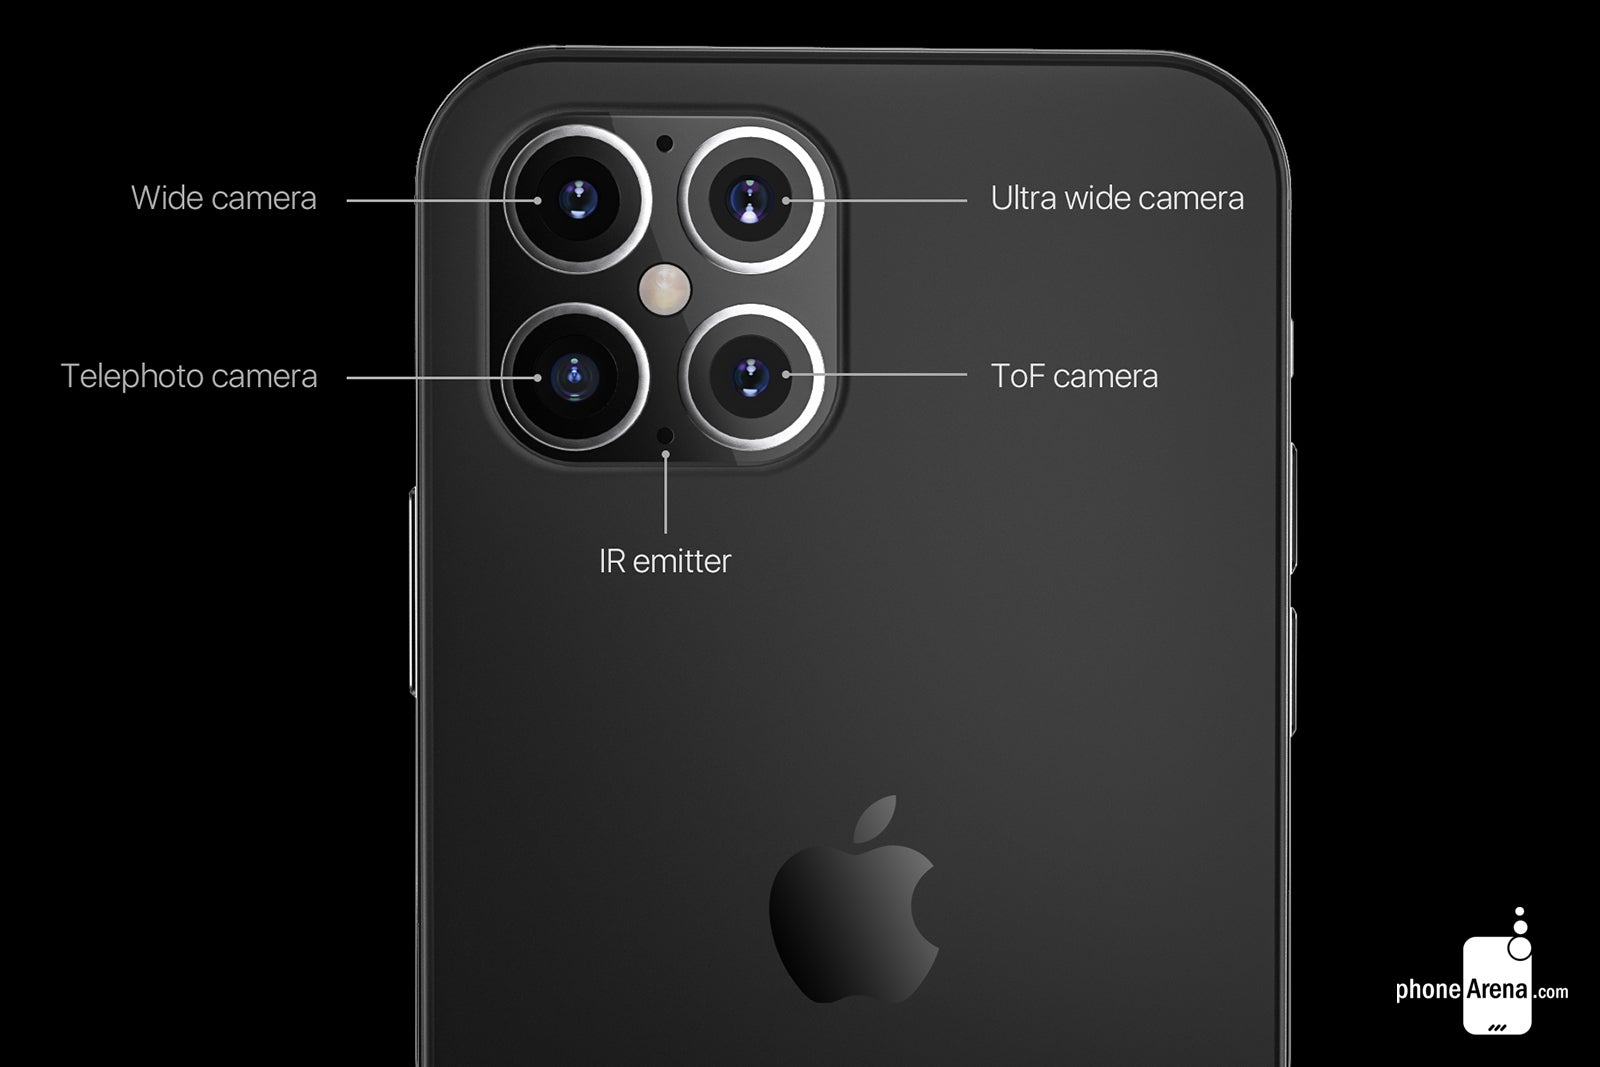 What the quad-camera setup might look like on the back of a 2020 5G iPhone - 5G Apple iPhone sales could disappoint next year